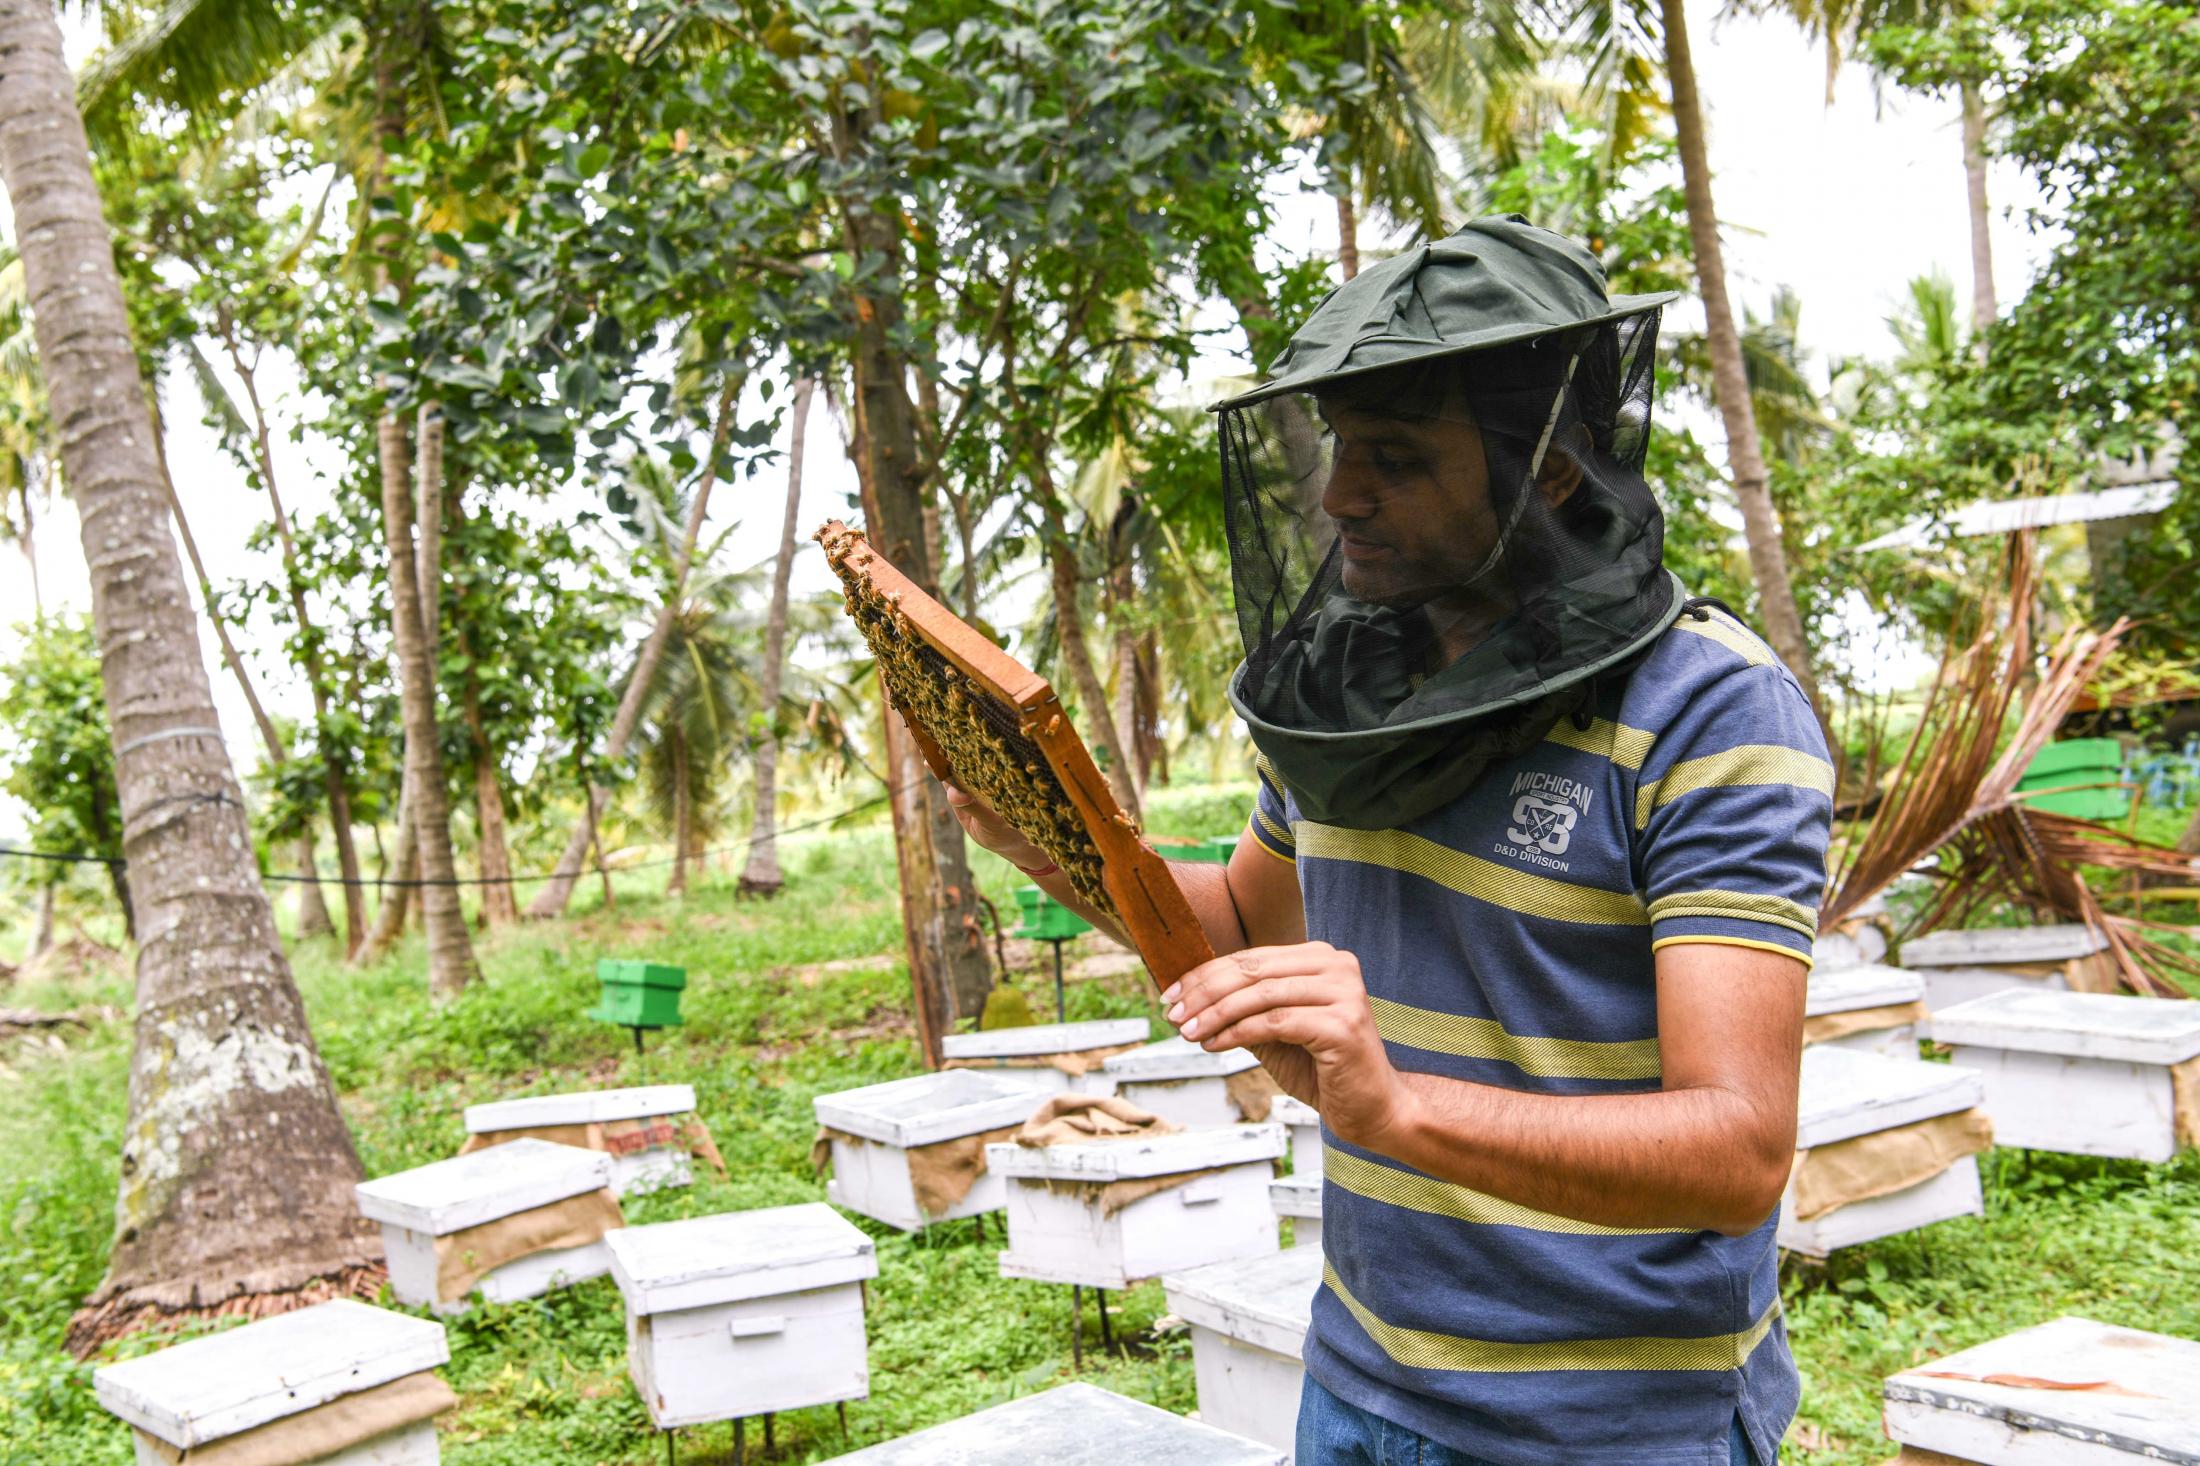 Apoorva visits his bee farm in Bidadi regularly to check the health of the bees. He is a mechanical engineer but a beekeeper by profession. He found his passion for bees even before he graduated and took it up soon after. He&rsquo;s been working on bees for over 10 years and works closely with farmers across the country. He travels, meets farmers, trains them, gives them bee boxes, follows up with them on the progress and reviews the health of the bees regularly. He also helps them sell their produce. While Apoorva works with a lot of people across the country, this is a story close to home where he&rsquo;s been working with flood victims in Coorg. He is involved in multiple activities such as honey production, bee breeding, manufacturing beekeeping equipment, selling honey and beehive by-products, mainly wax. His company&#39;s annual turnover is over 2 crores. He has both Indian and Italian bees.